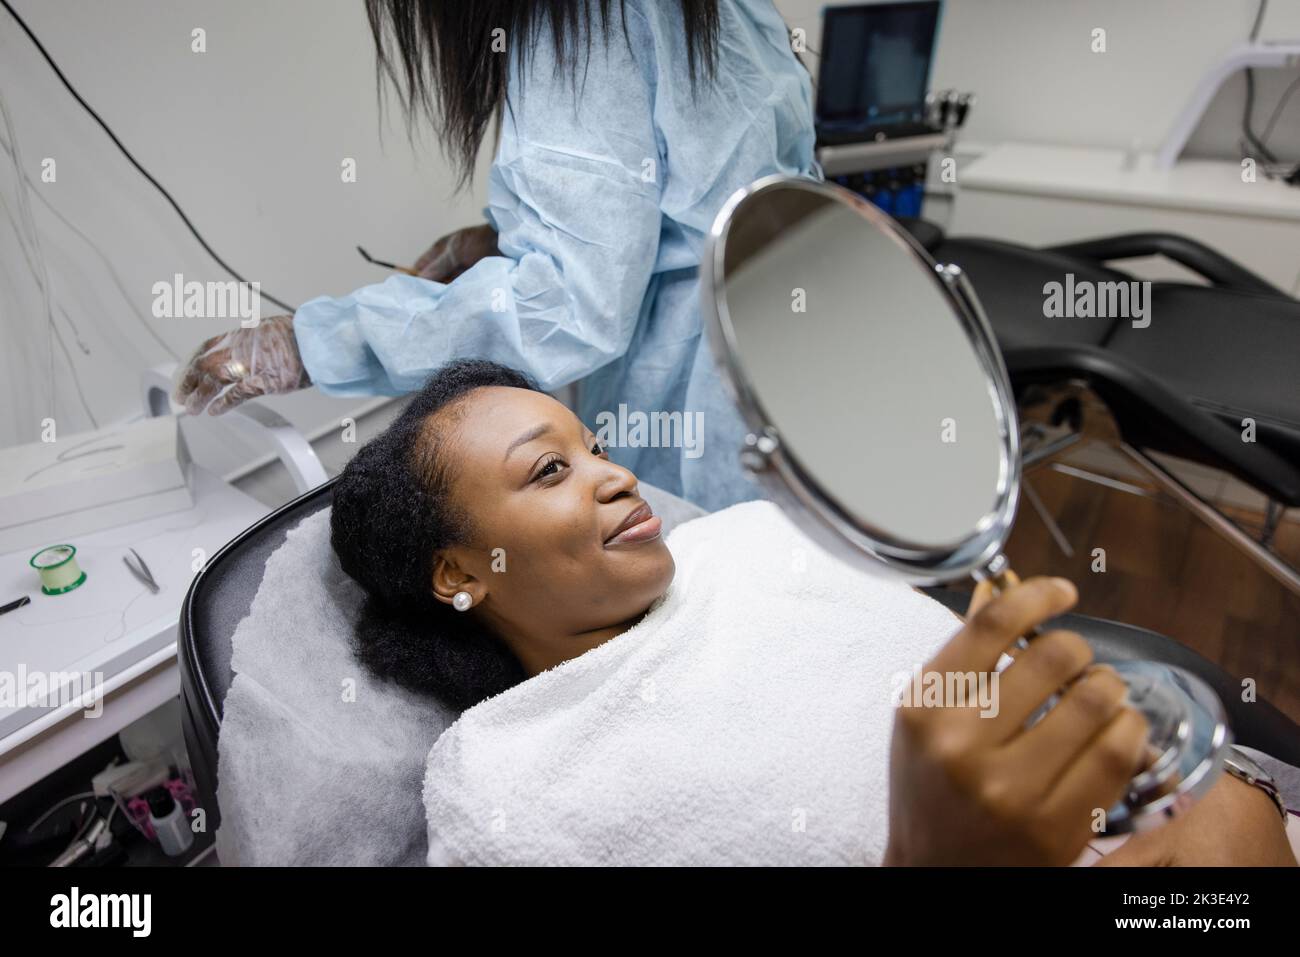 Smiling female customer with mirror getting brow wax in beauty salon Stock Photo